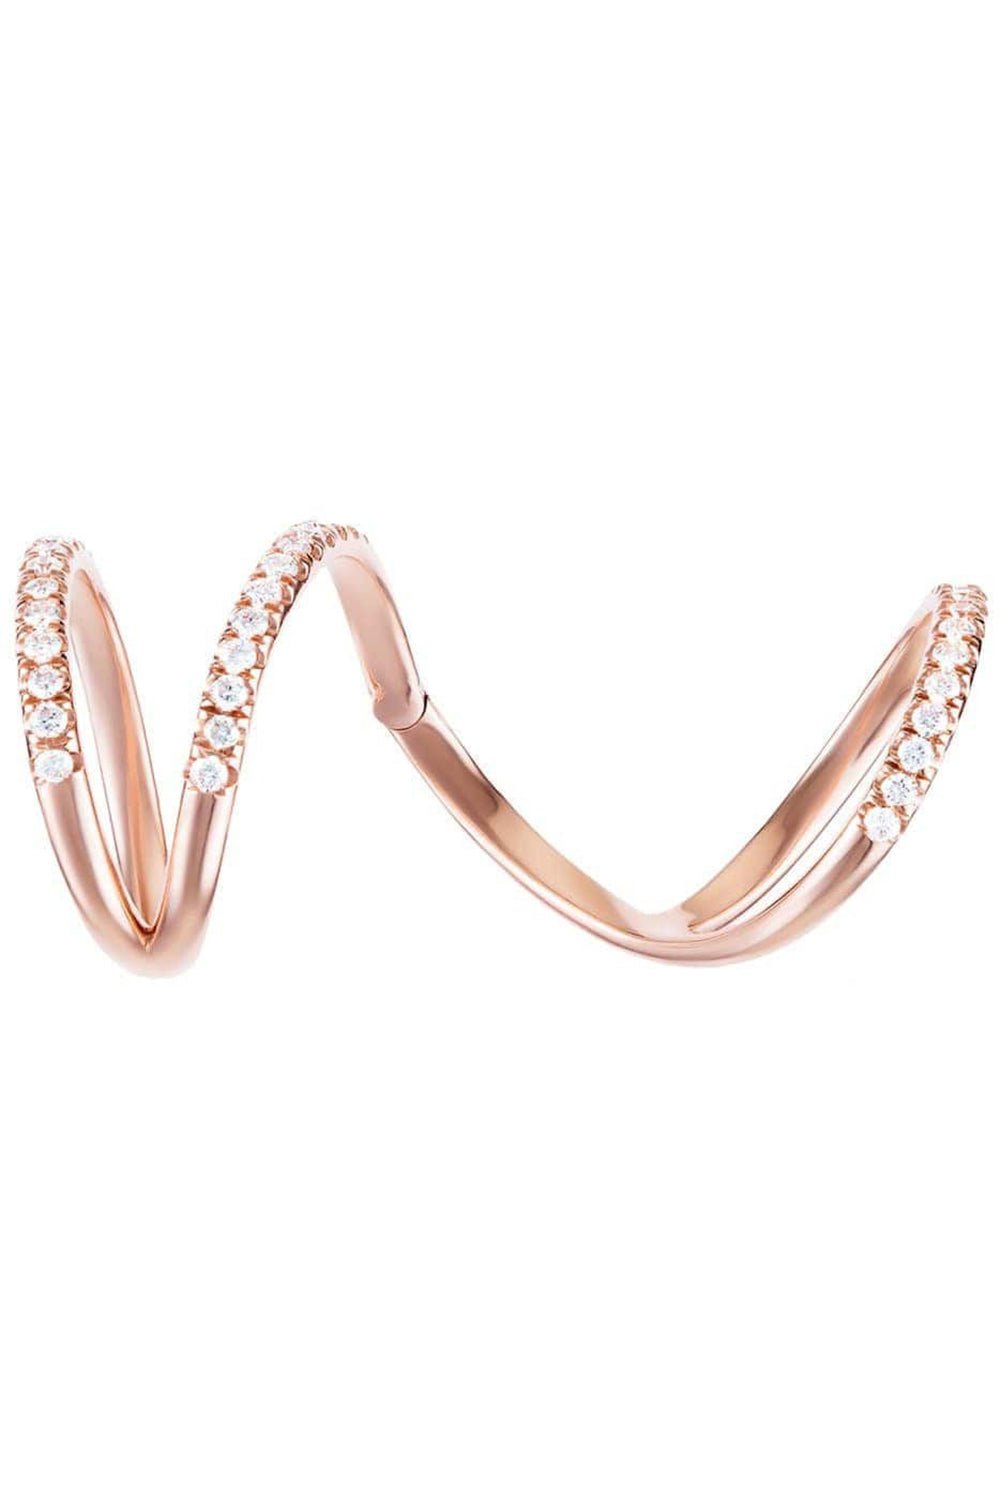 CARBON & HYDE-Arabesque Ring - Rose Gold-